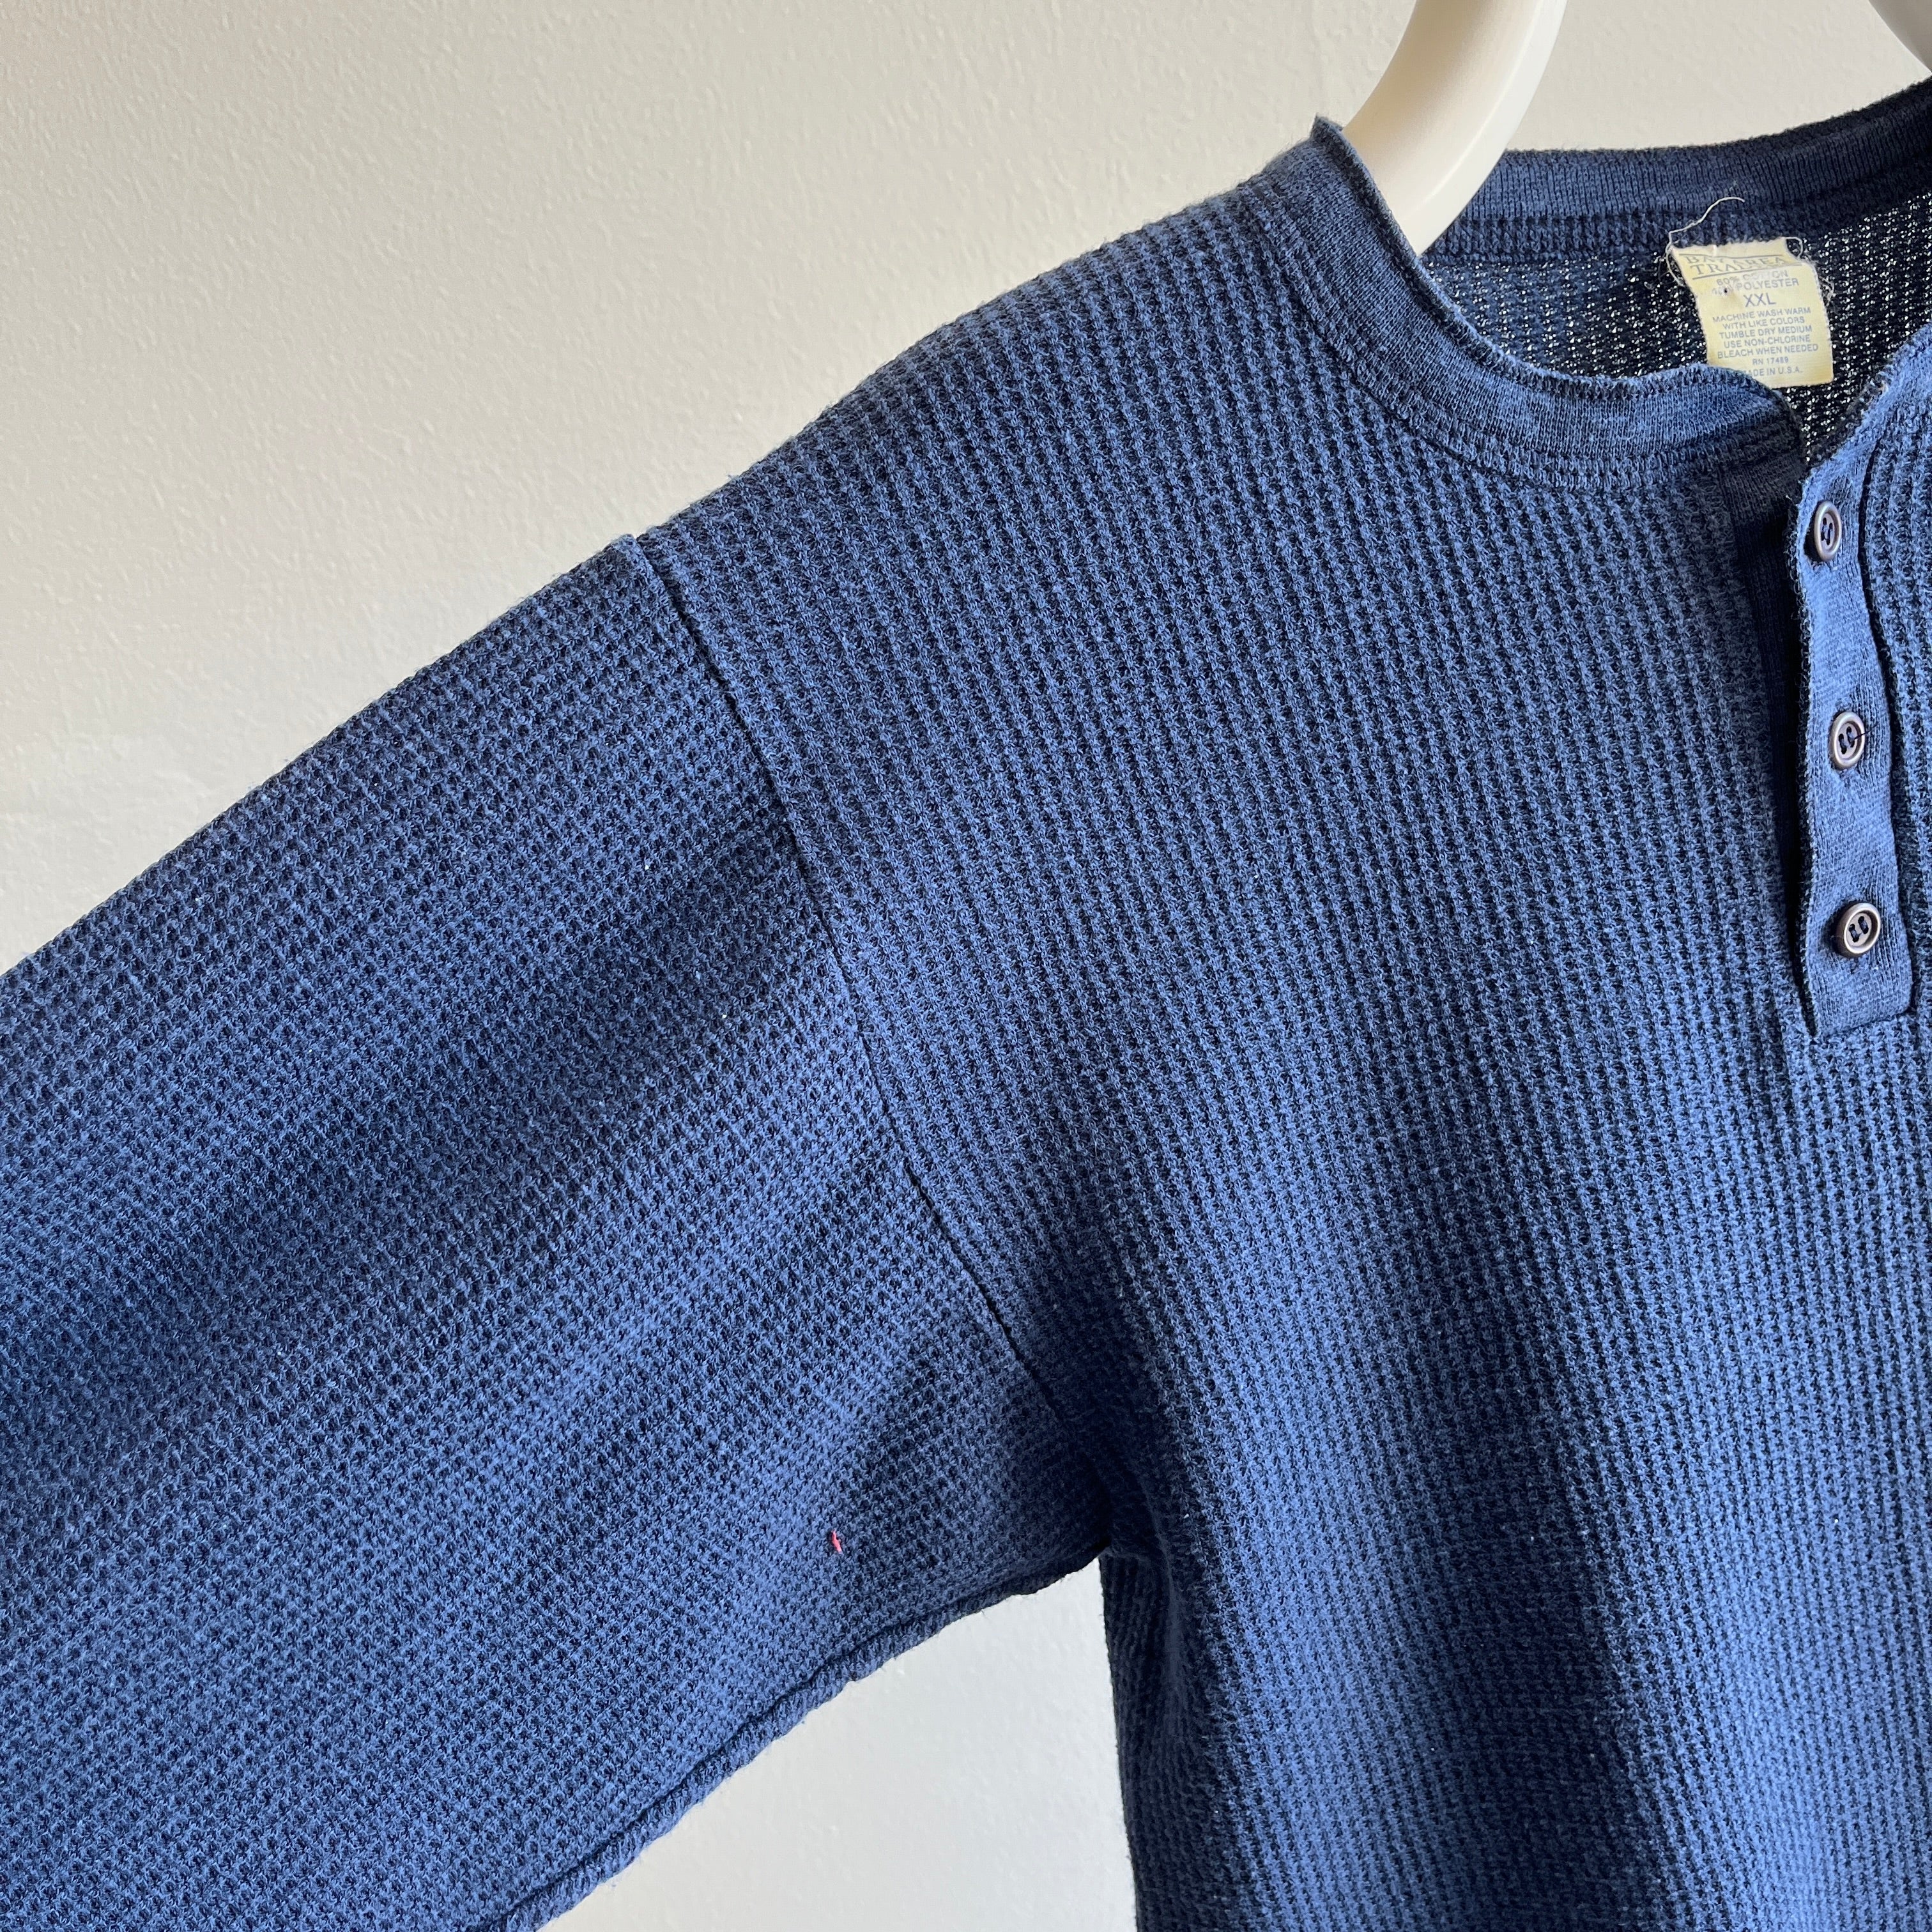 1980s Navy Long Sleeve Henley Thermal